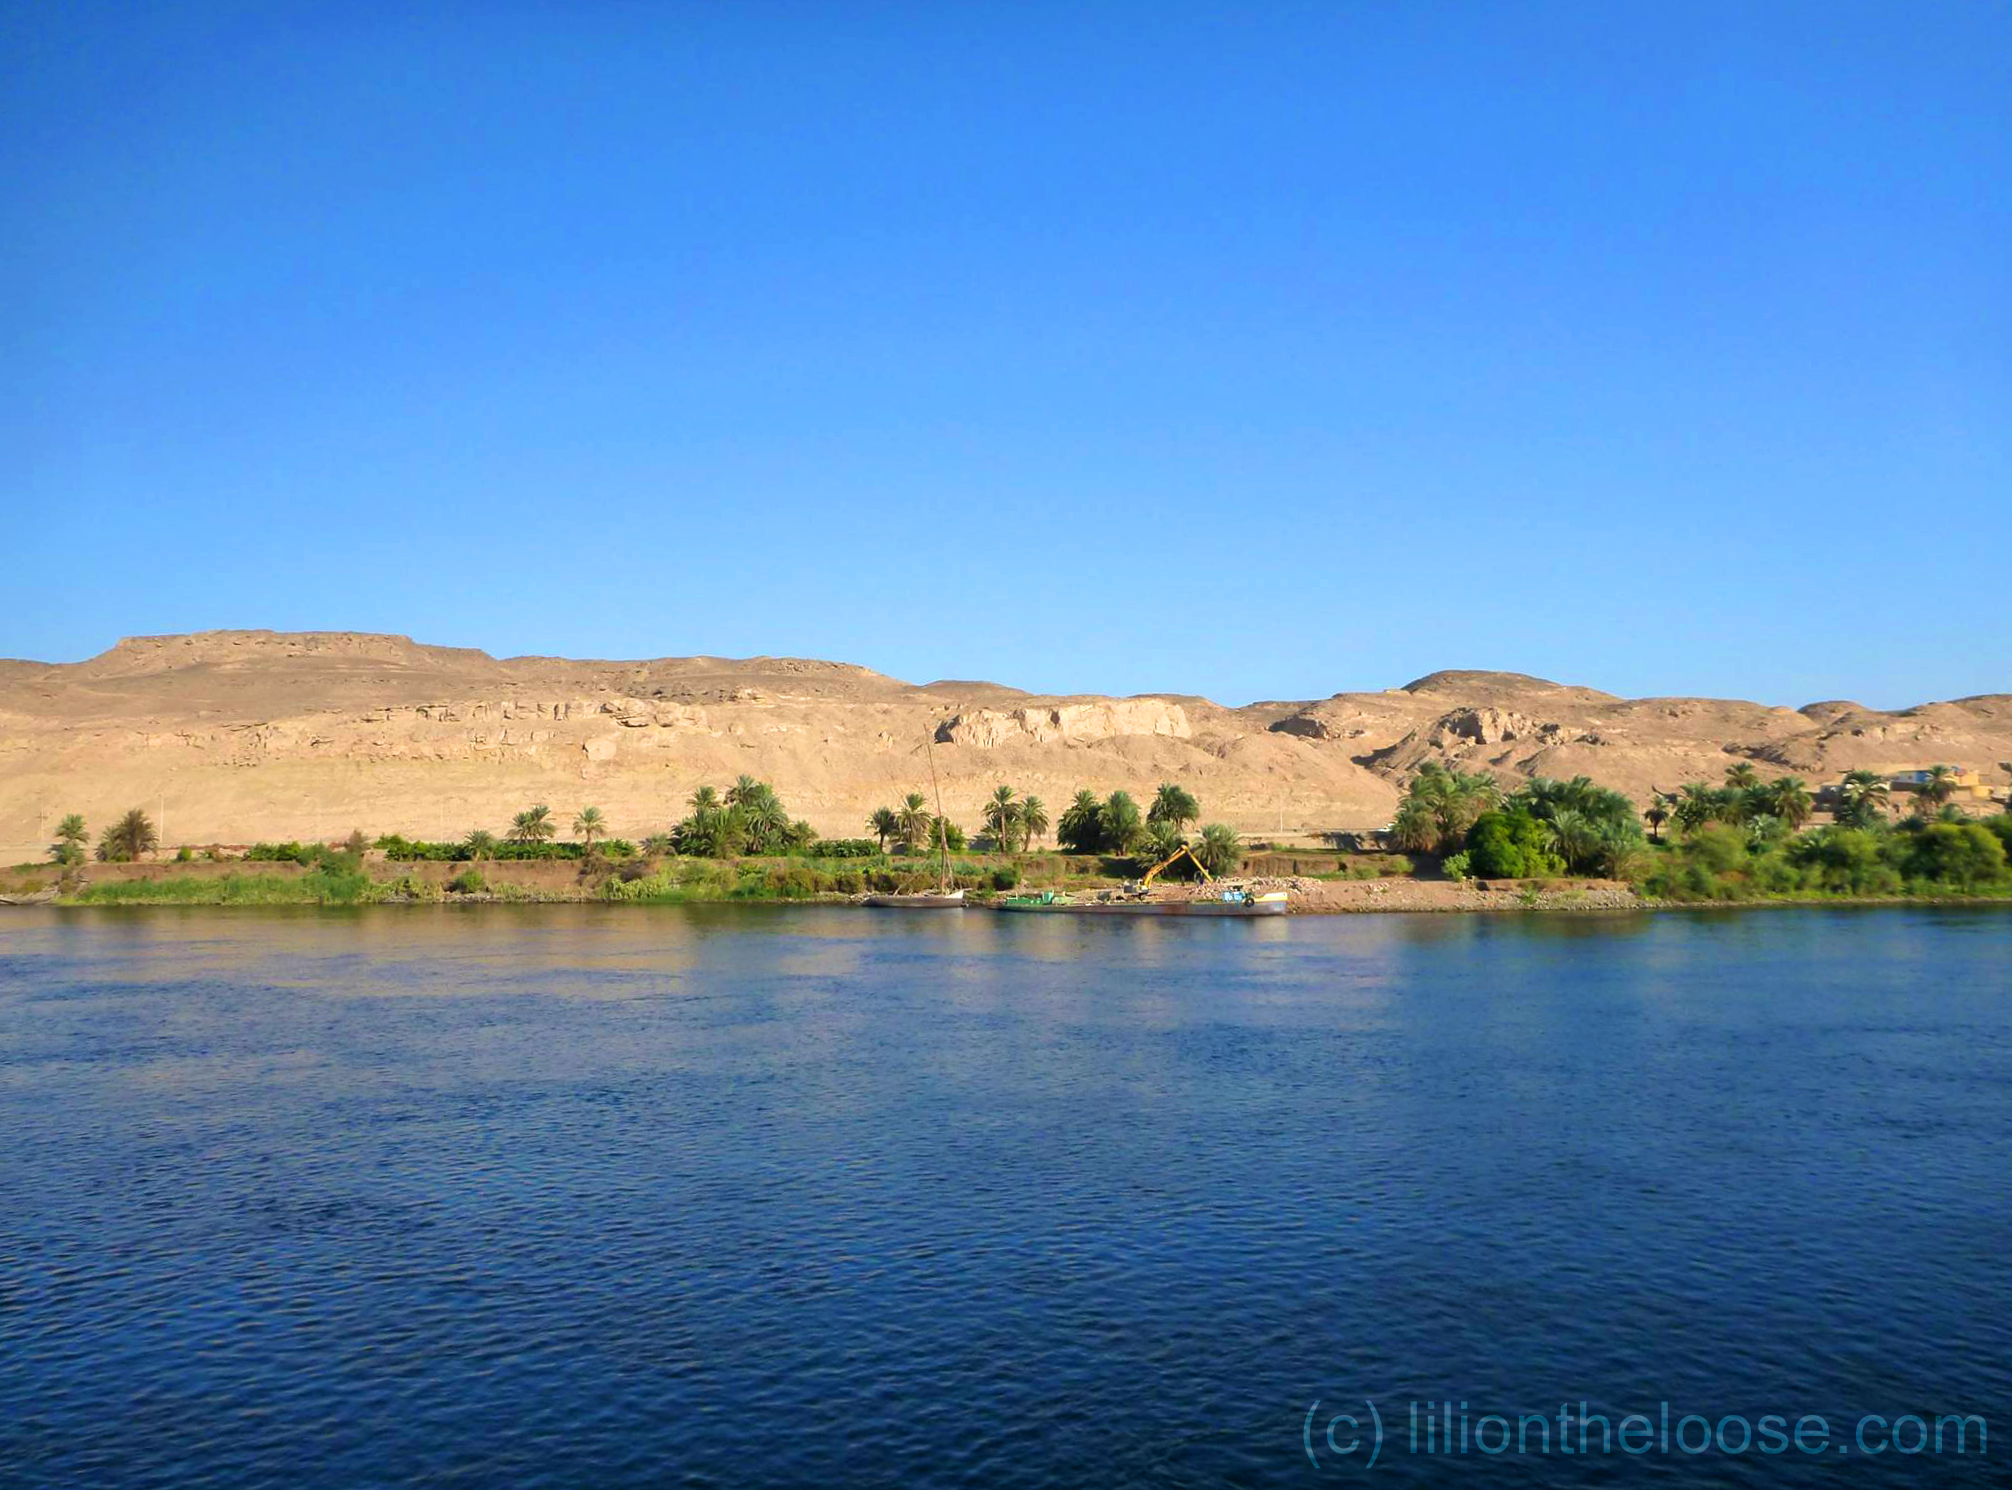 Egyptian Desert as seen from a Nile cruise.